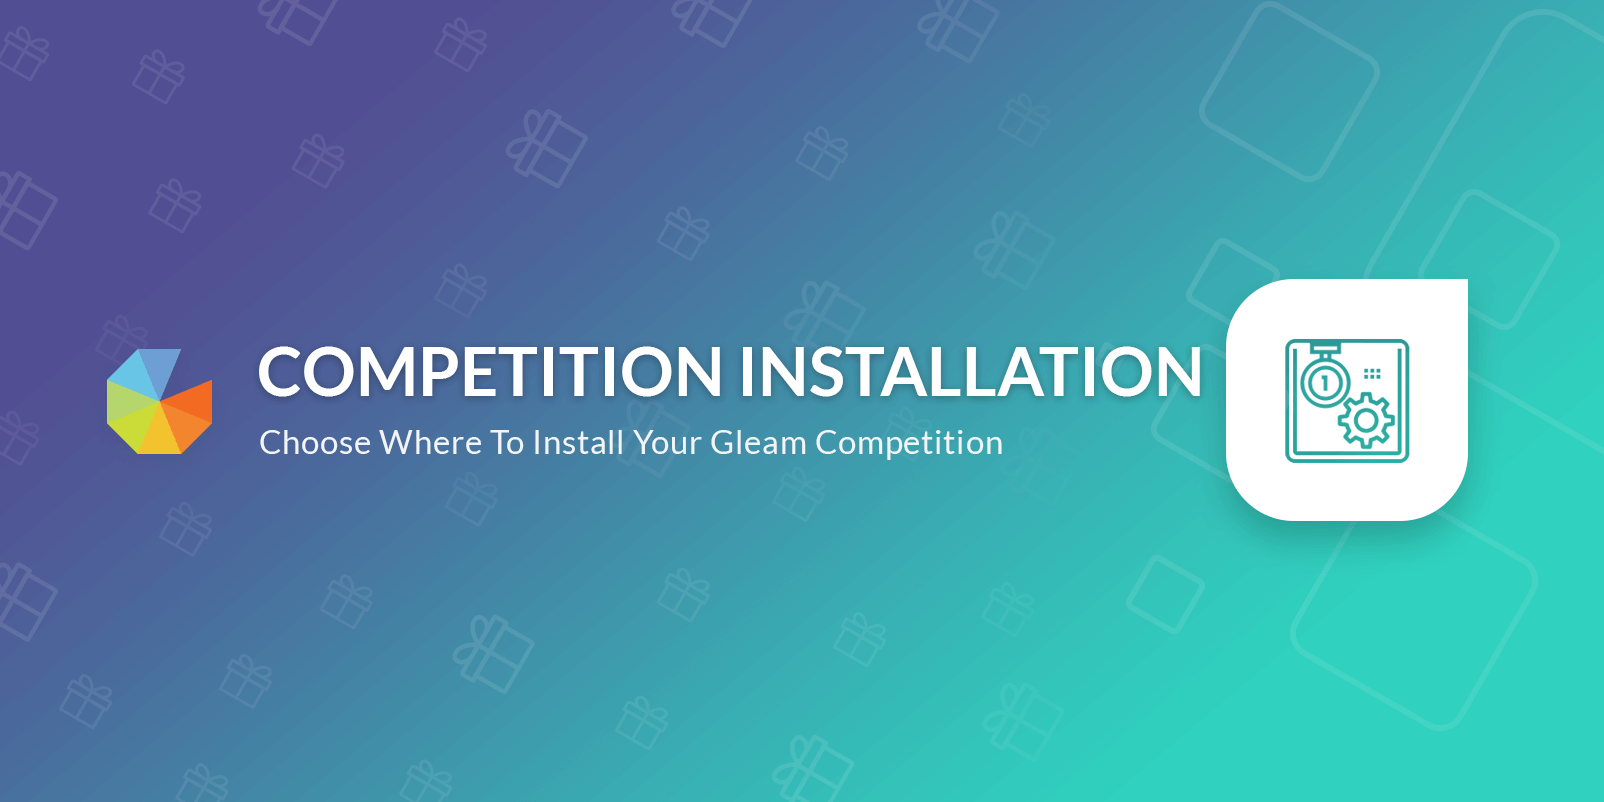 Competition installation, Choose where to install your Gleam competition